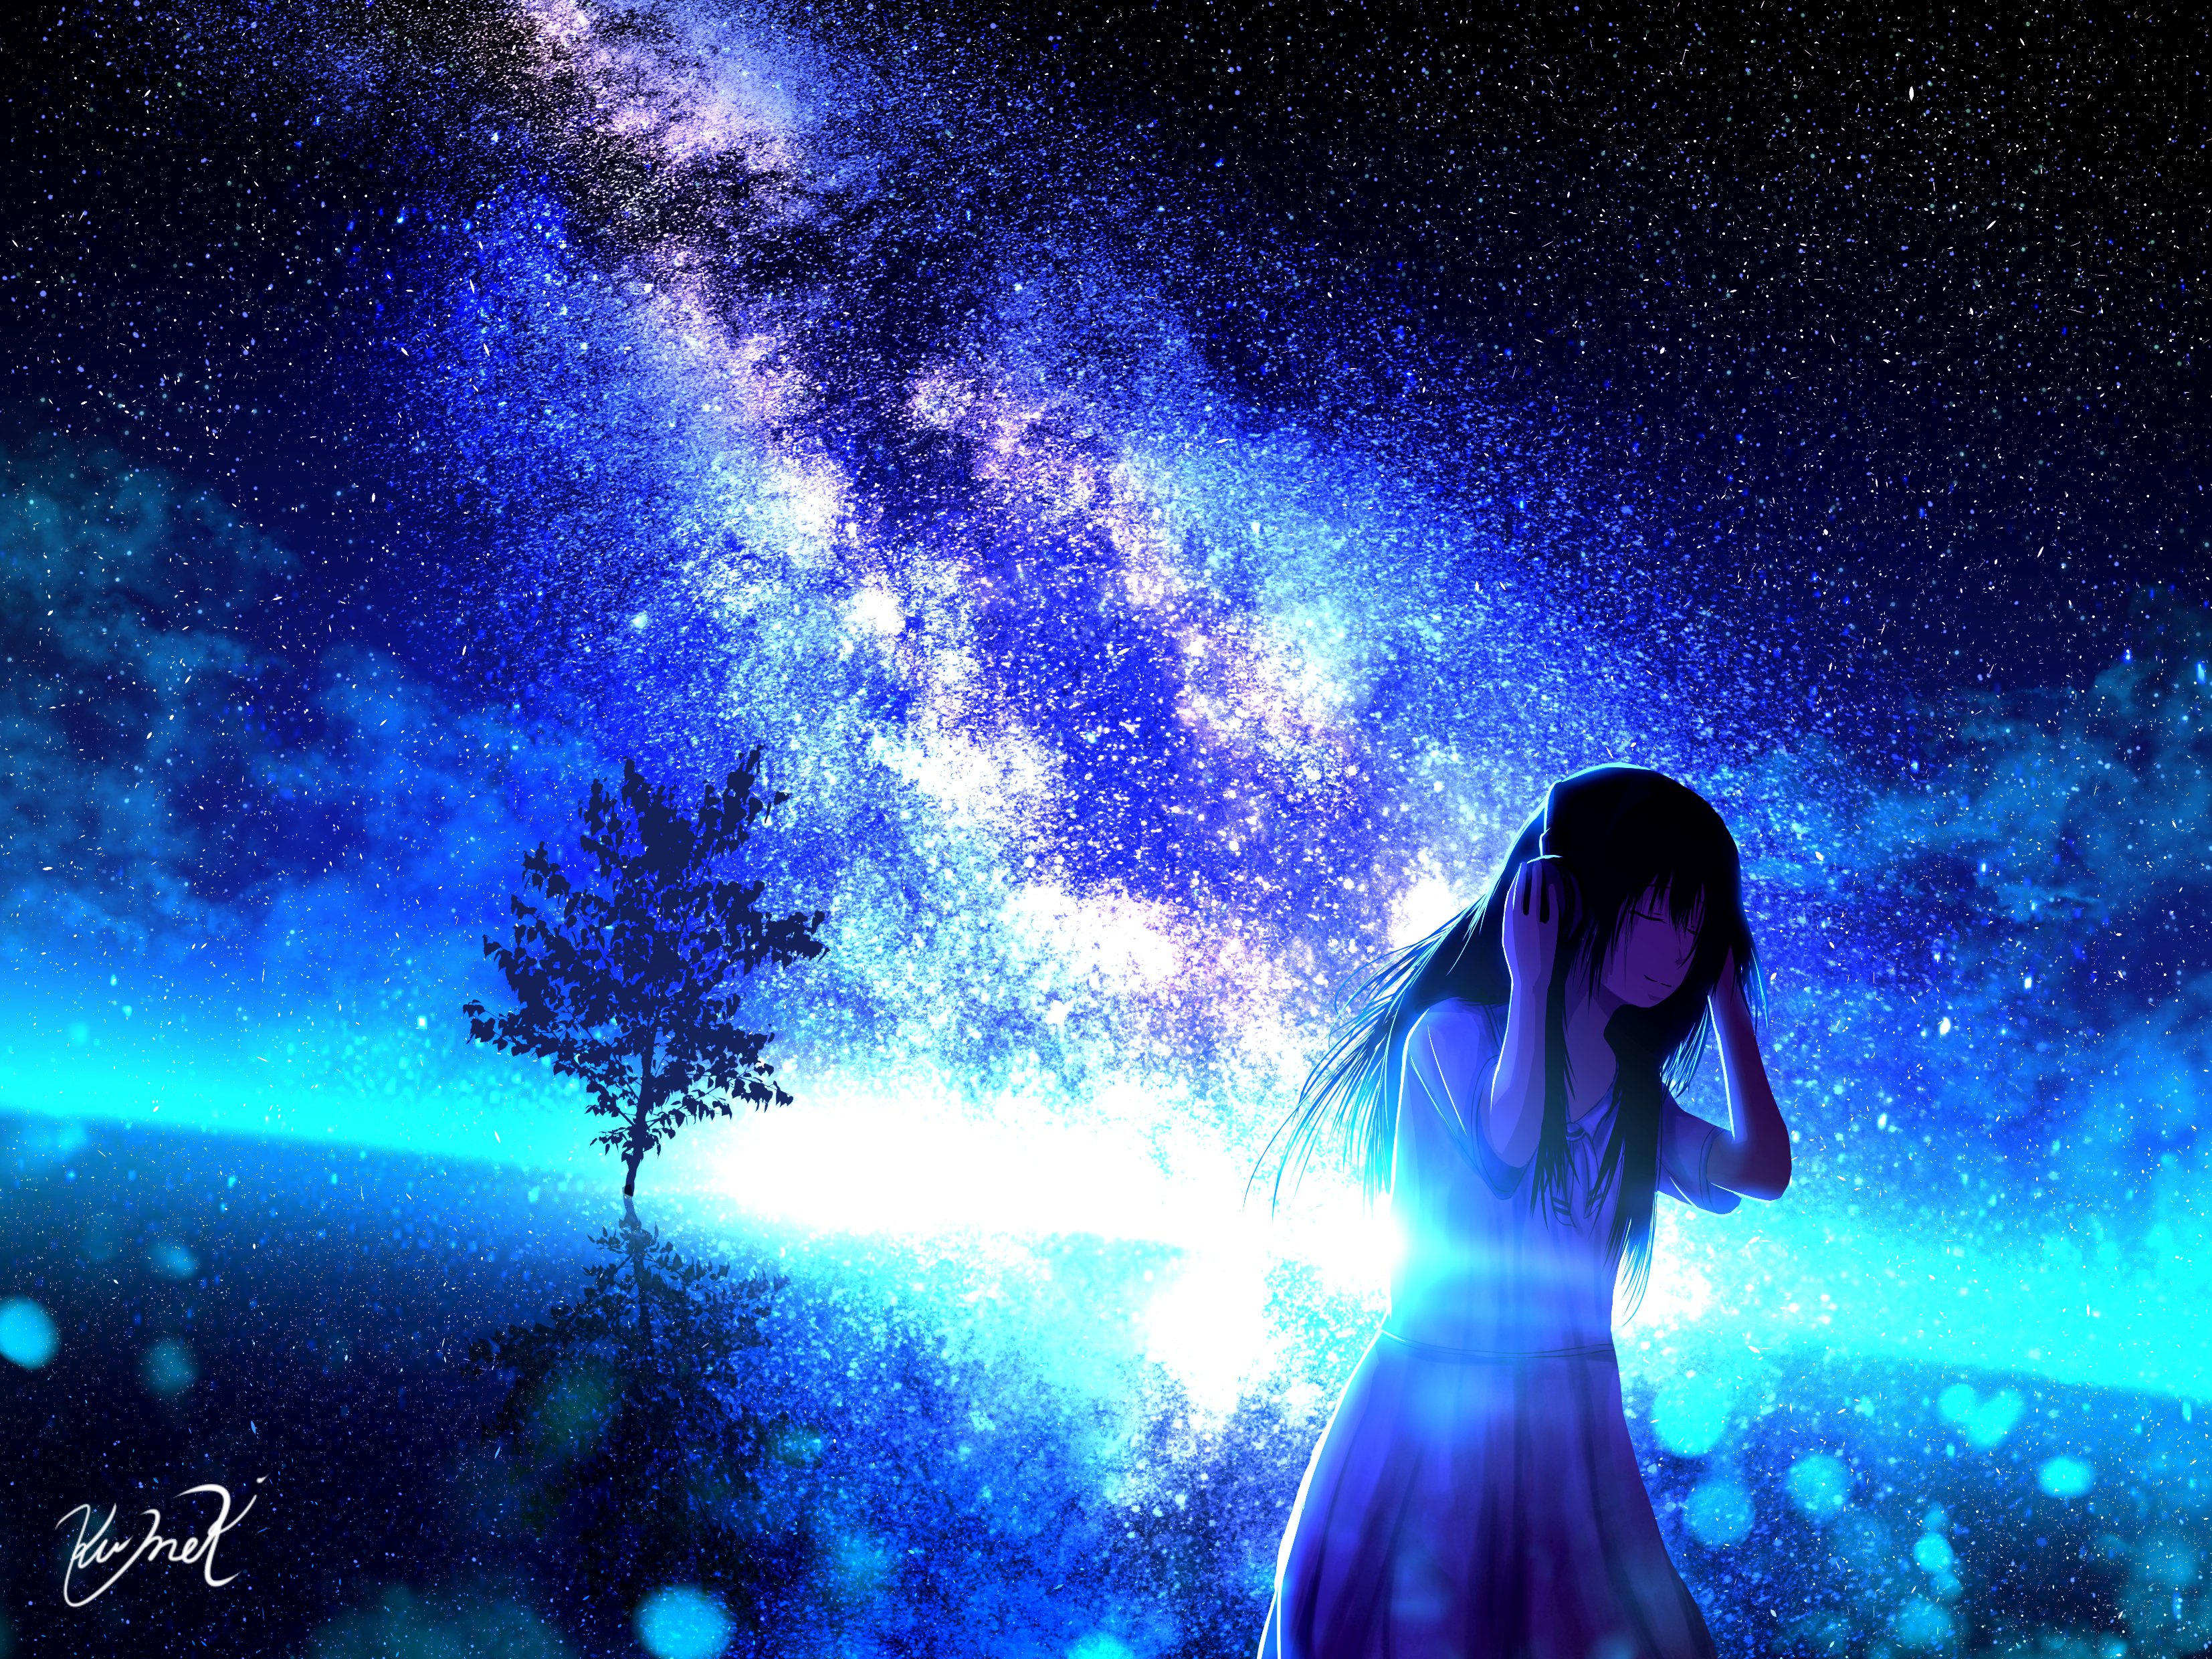 Girl listening to music on beautiful starry night by クメキ